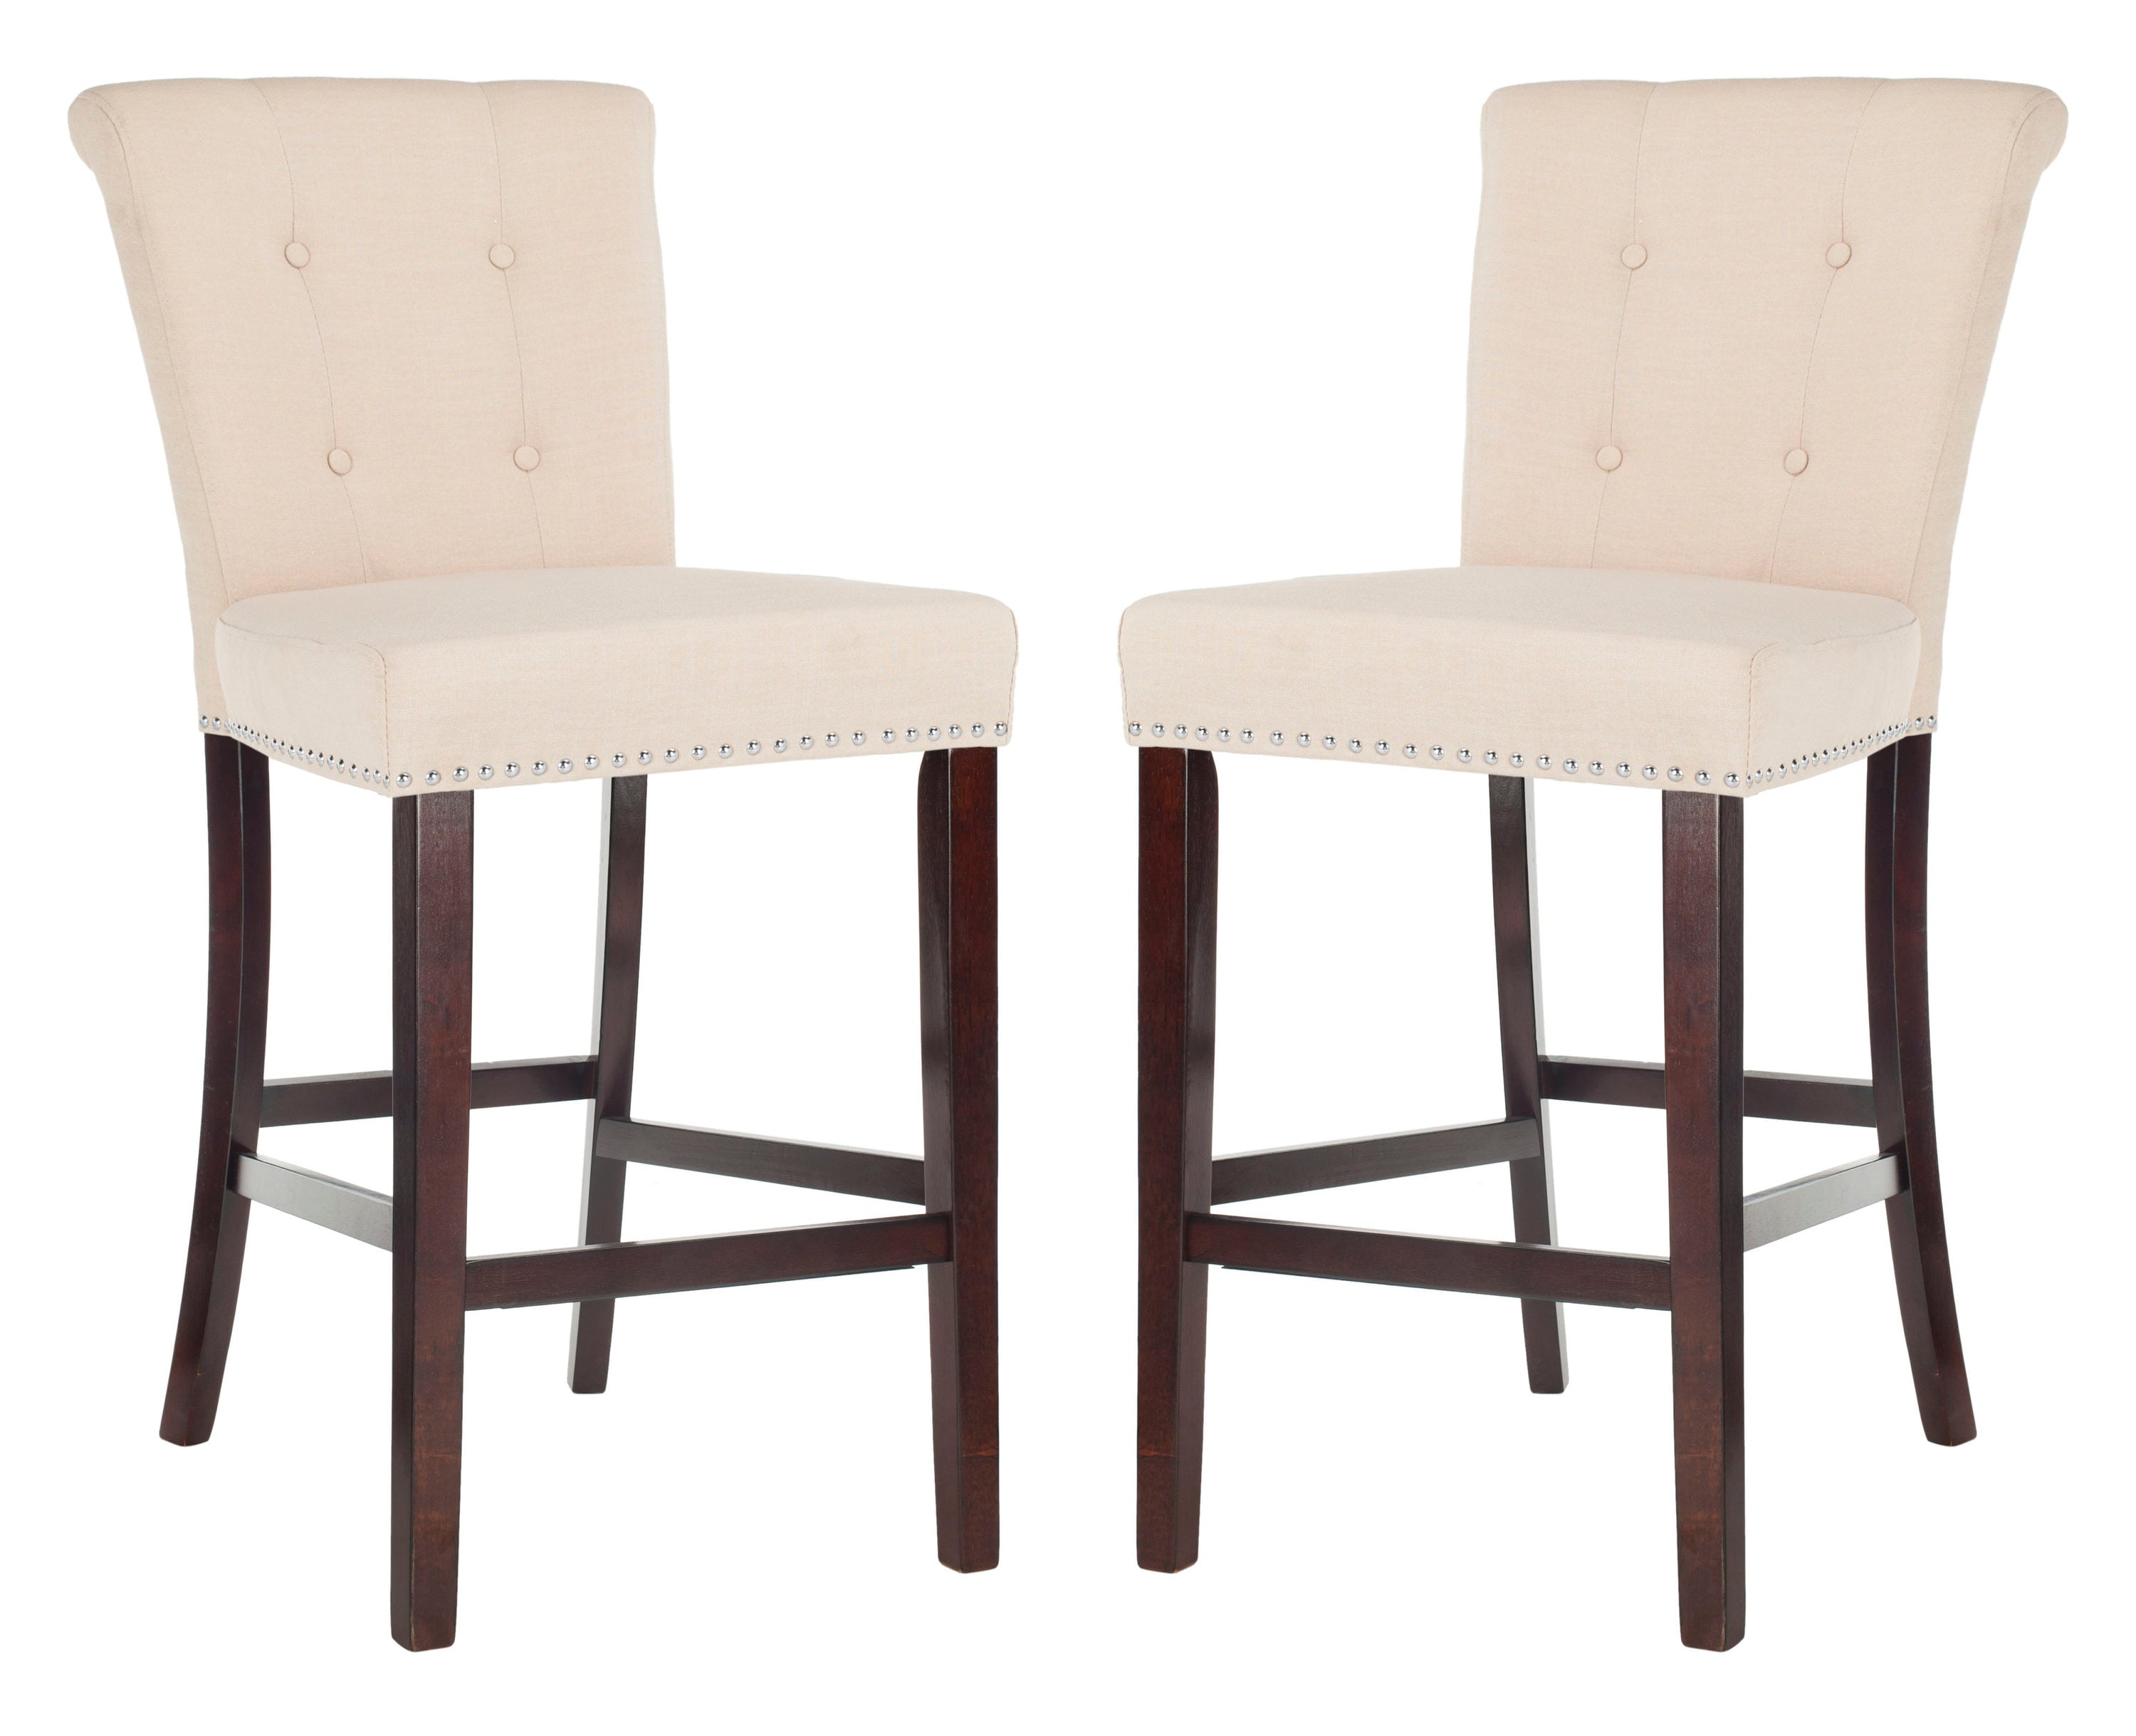 Upholstered Bar Stool In The Stools, French Script Bar Stools